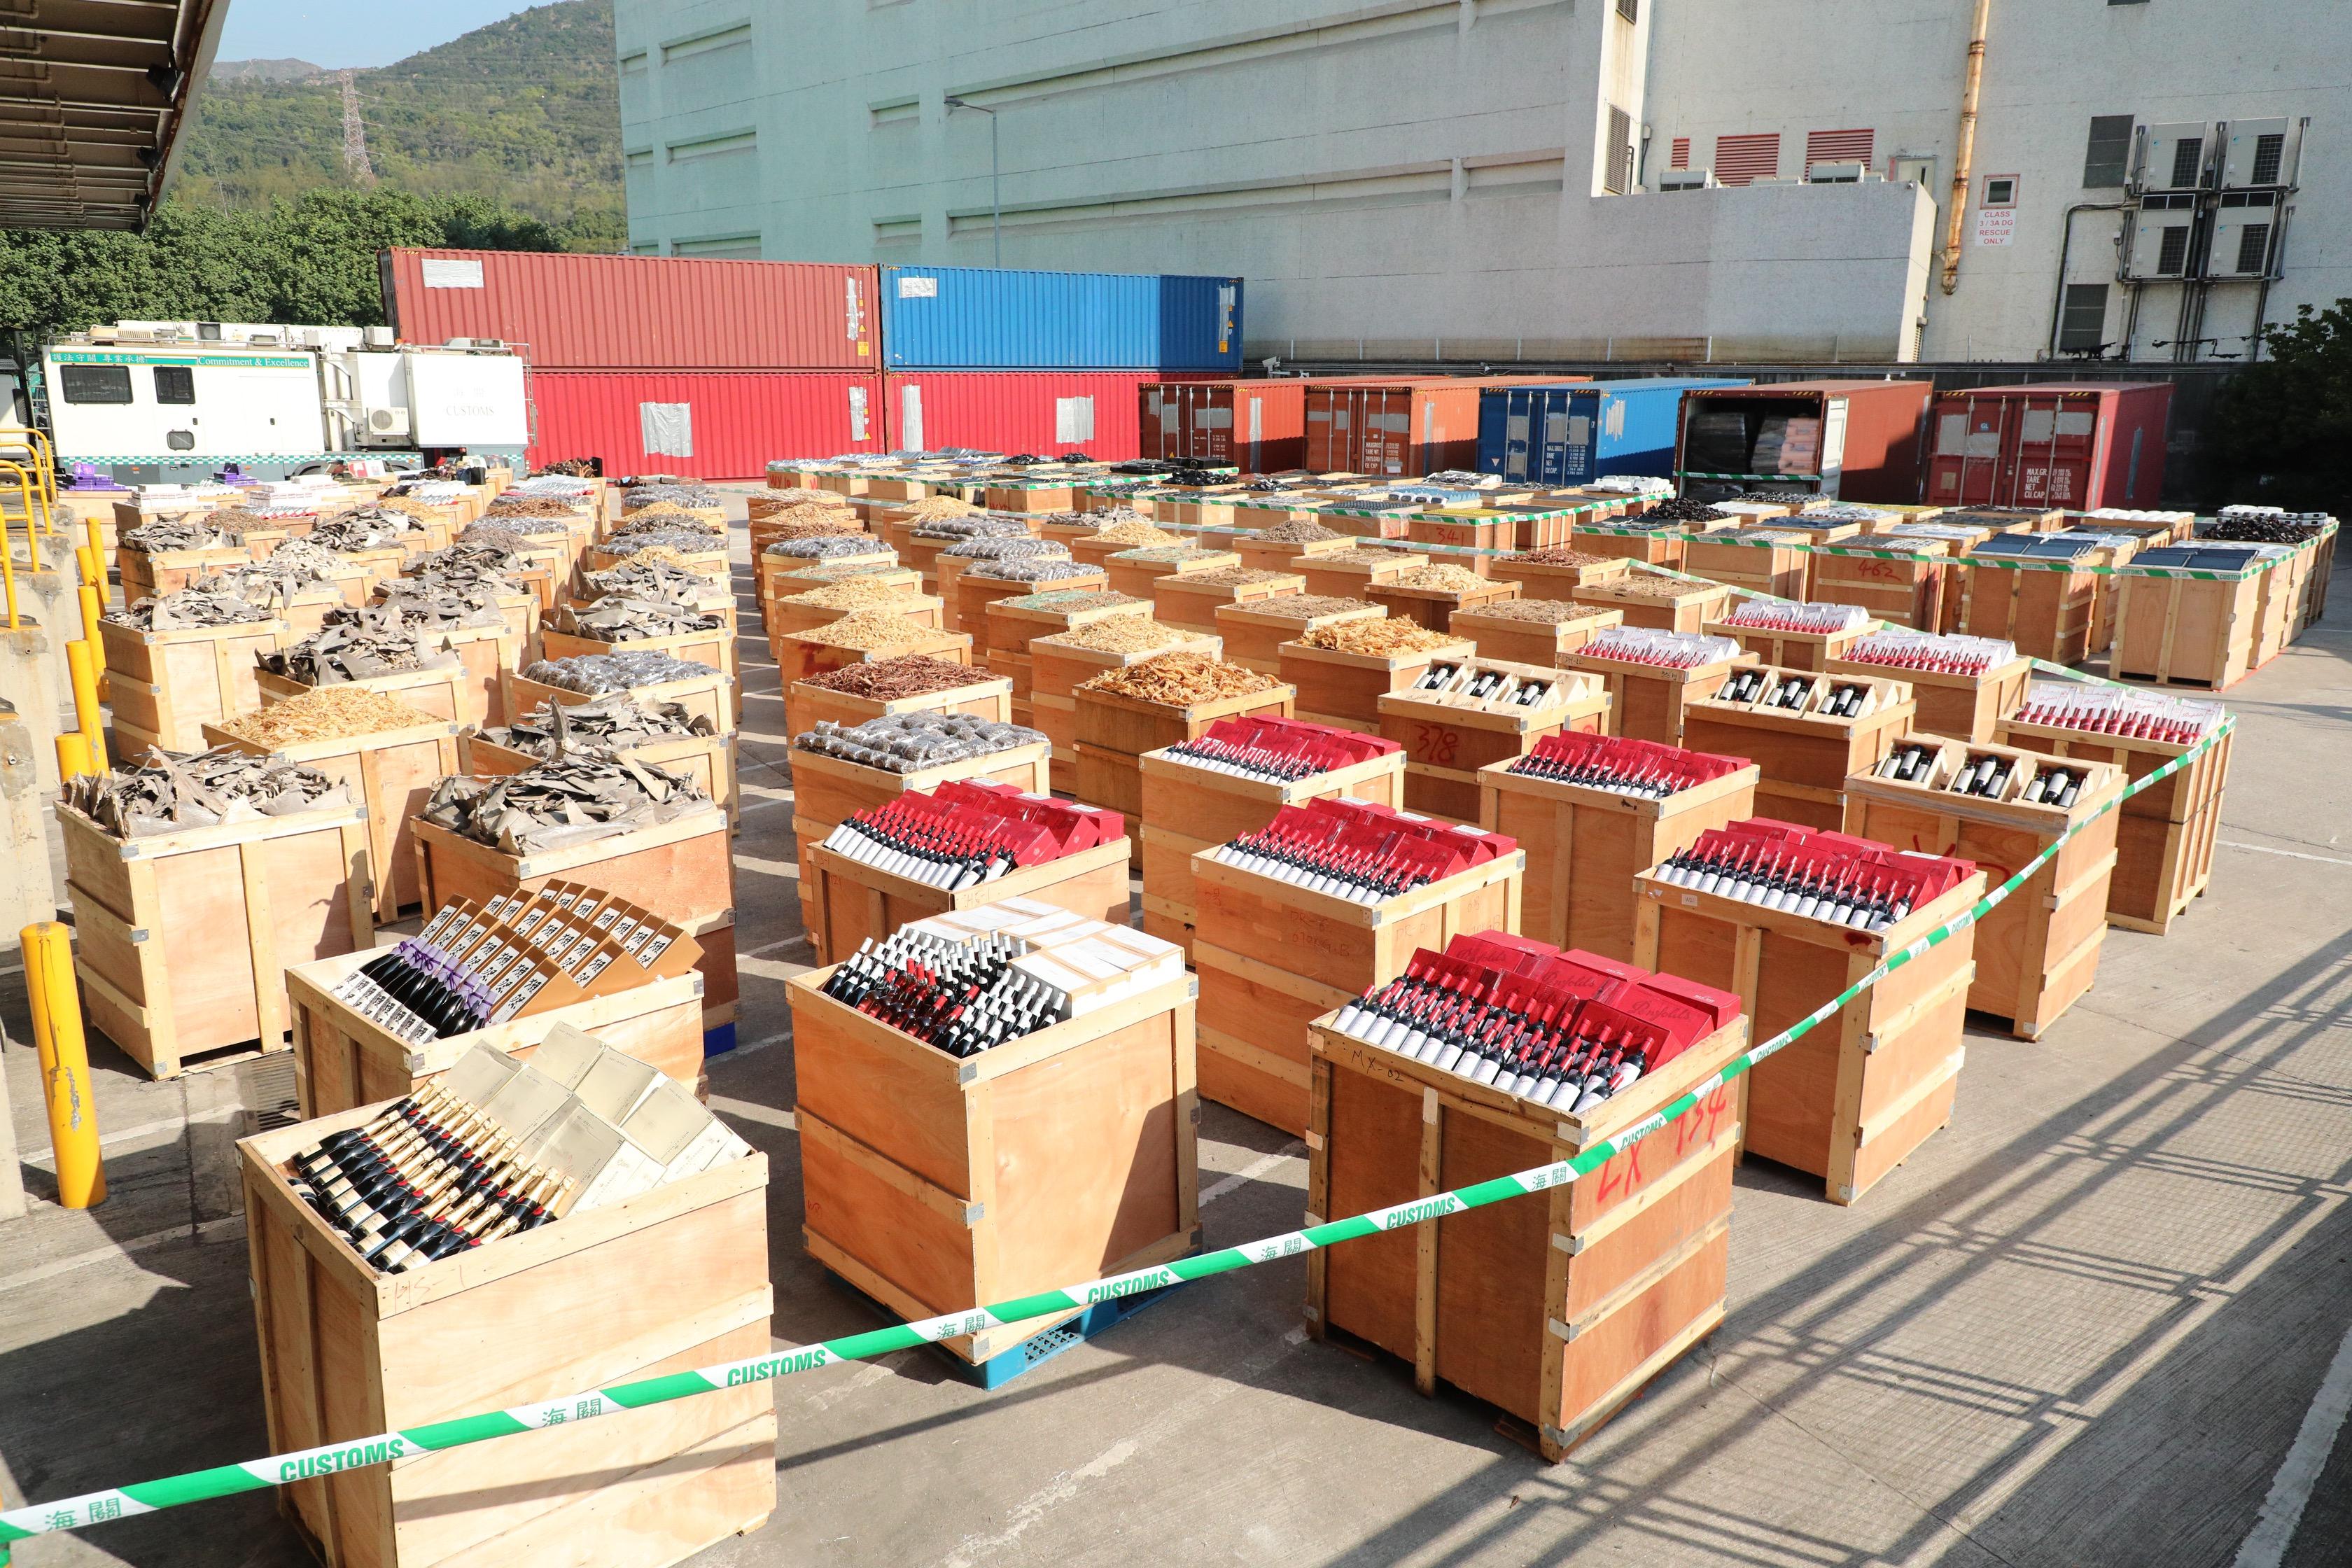 Hong Kong Customs on December 11 and 12 mounted a special enforcement operation codenamed "Convoy" and detected two suspected cases of using ocean-going vessels to smuggle goods to the Mainland at Tsing Yi Container Terminal. A large batch of suspected smuggled goods, including expensive food ingredients, electronic goods, vinyl records, table wines, medicine and scheduled endangered species, with a total estimated market value of about $200 million was seized. Photo shows some of the suspected smuggled goods seized.